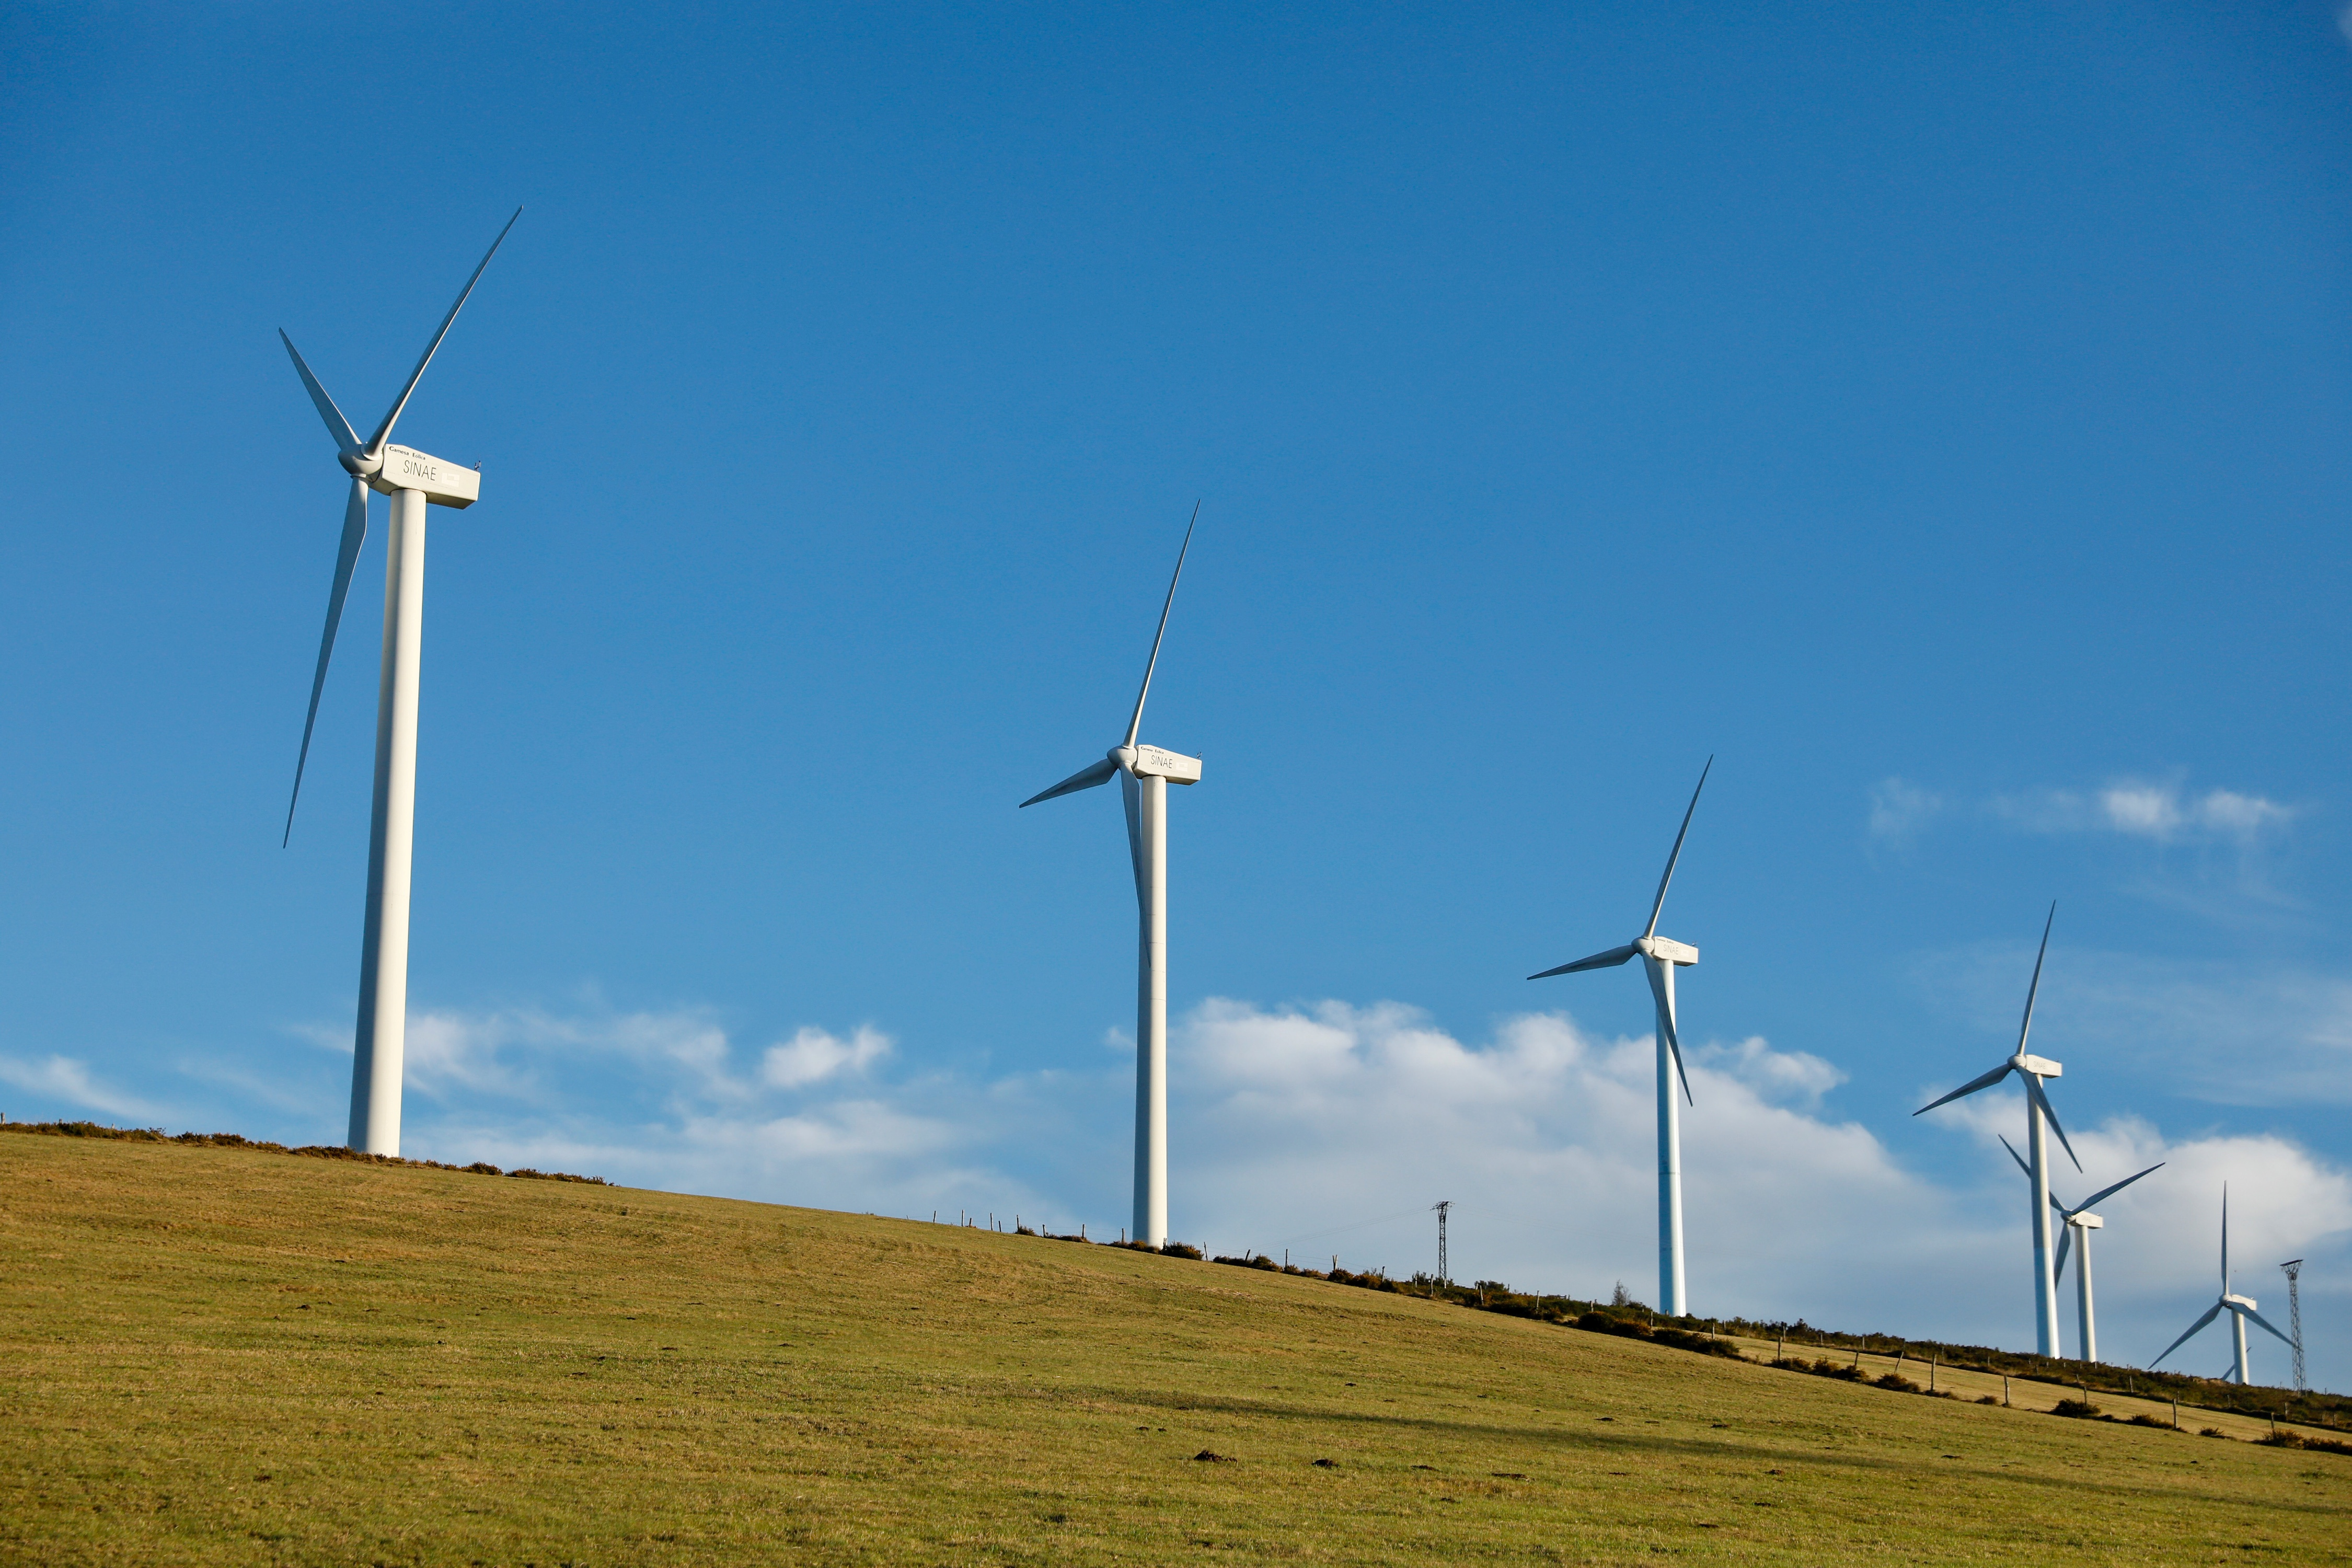 Wind turbines used to generate electricity are seen near the village of La Mesa